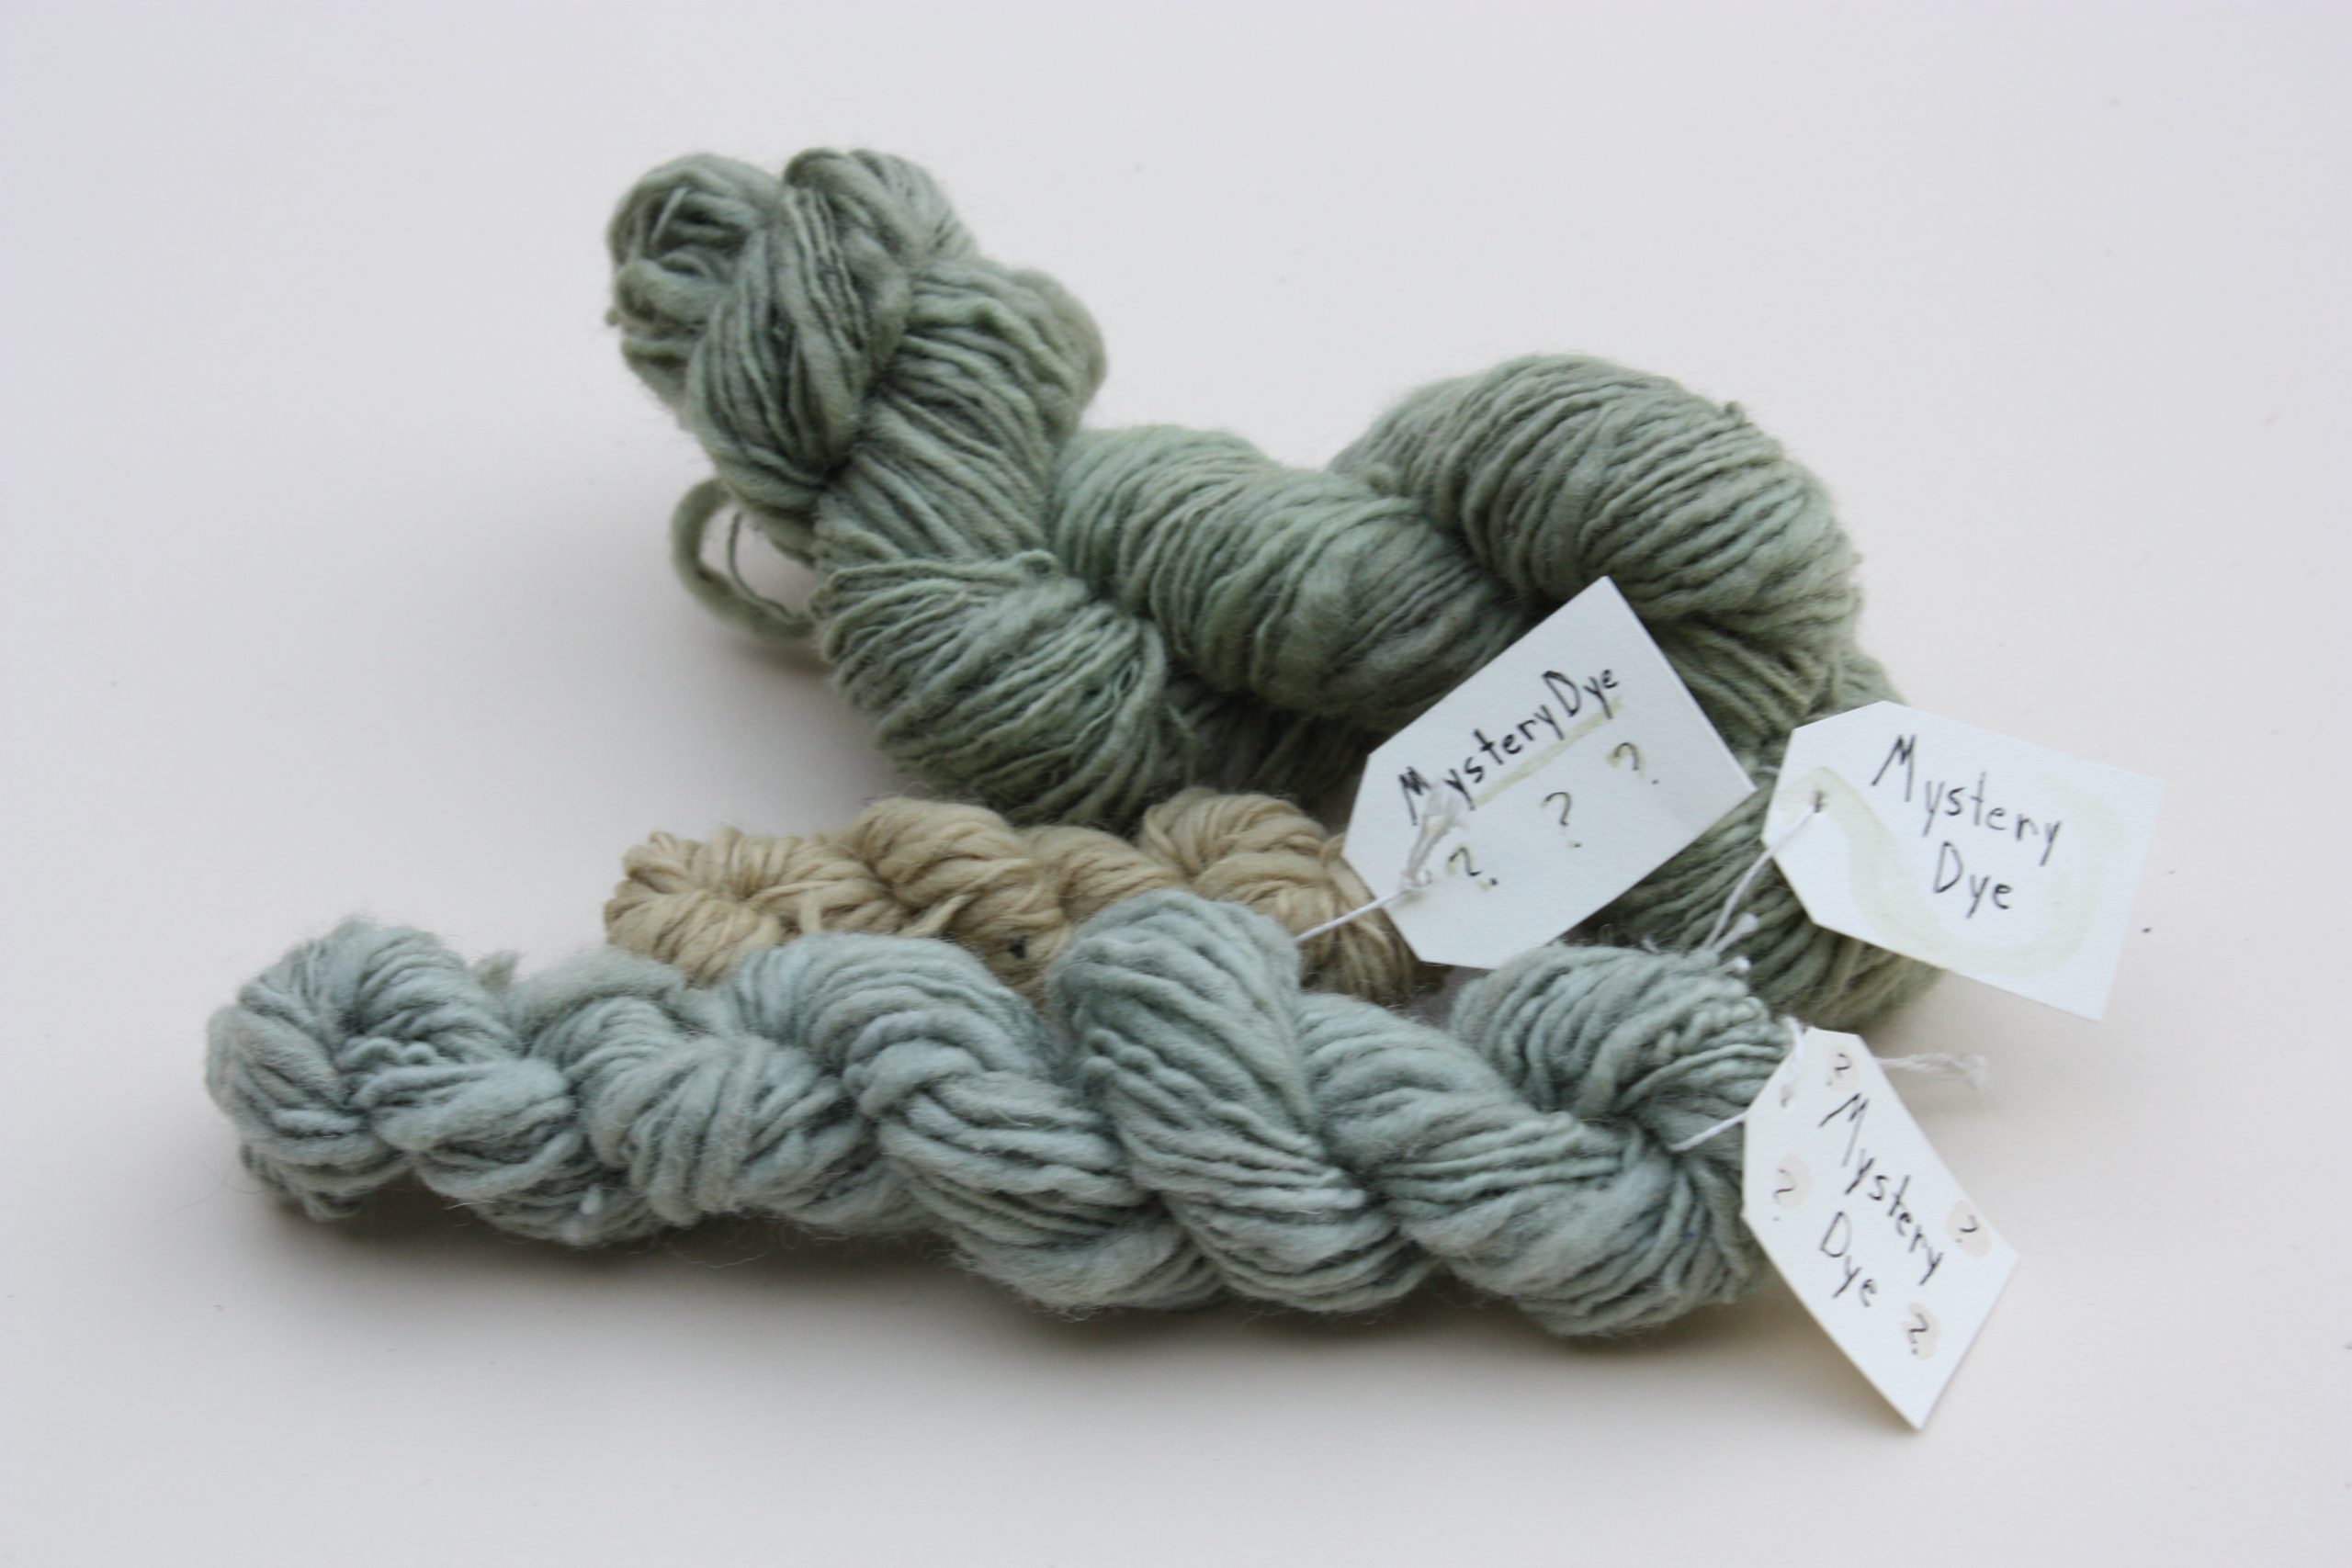 5 Tips For Getting Started With Natural Dyes